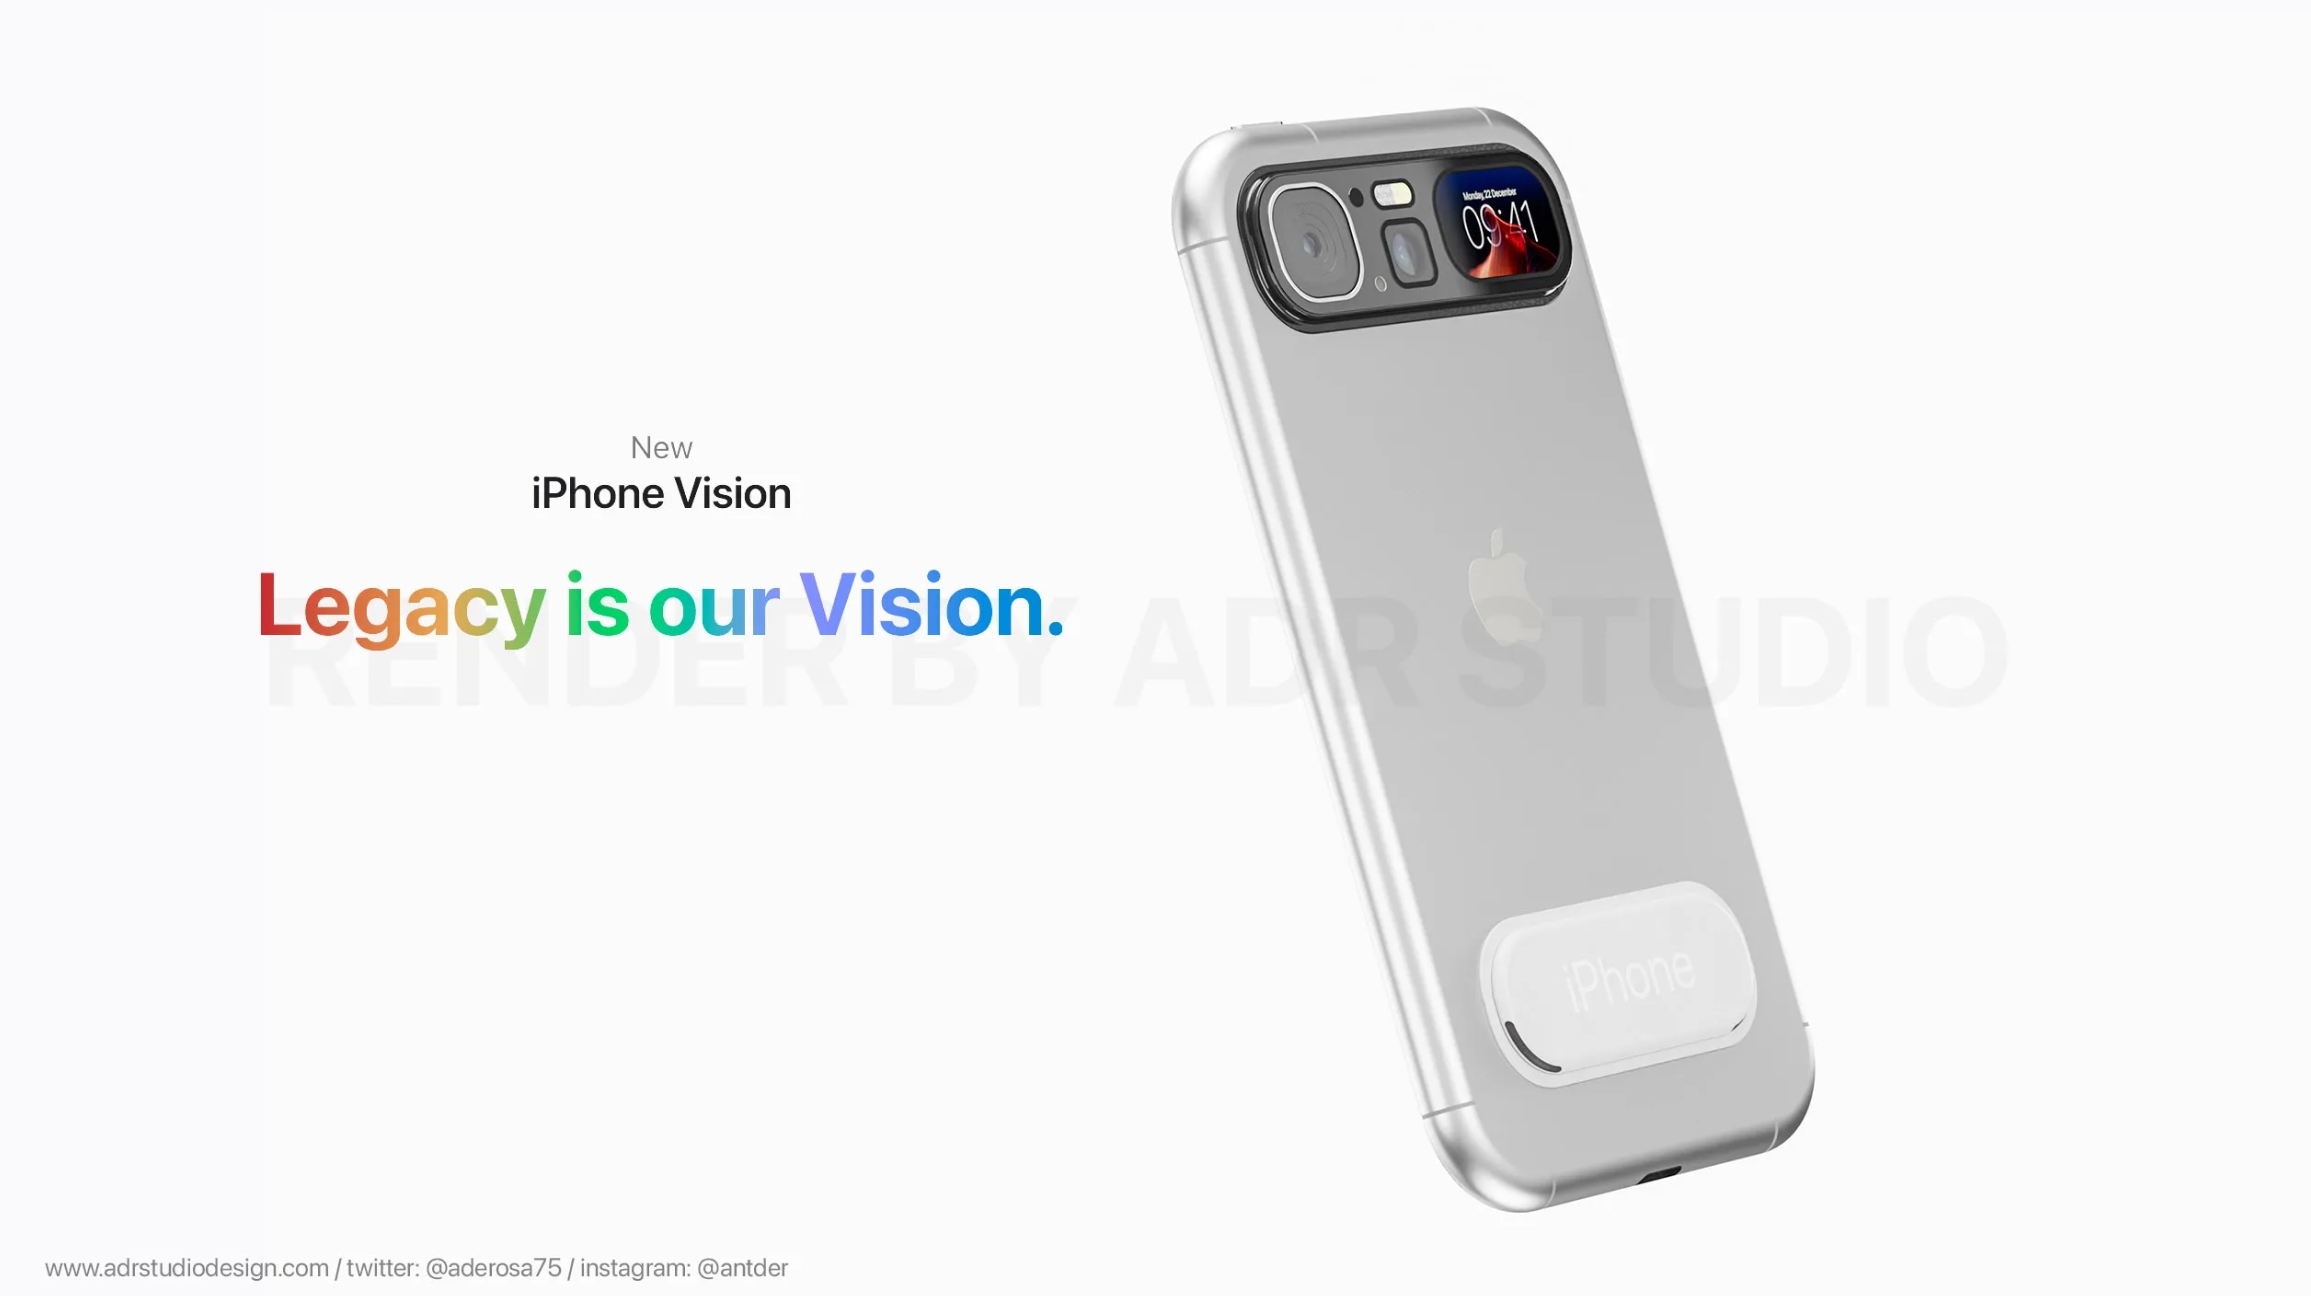 An image of an iPhone concept